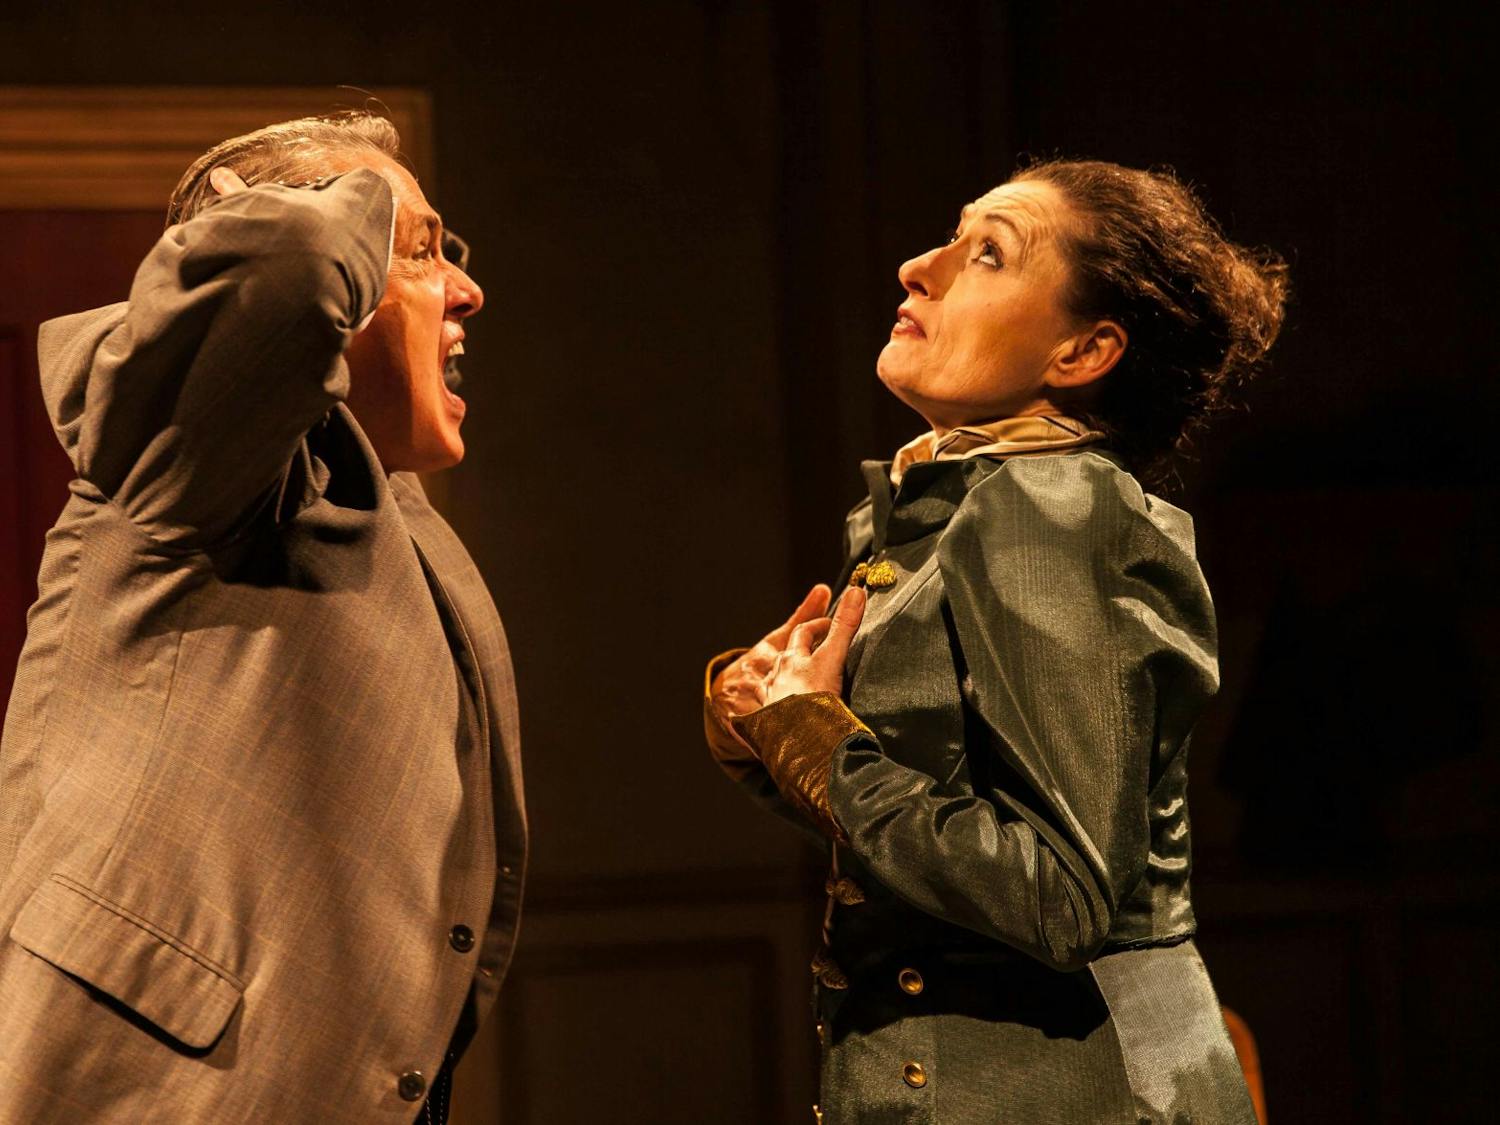 Nora, portrayed by Tess Hogan,&nbsp;and Torvald, portrayed by V Craig Heidenreich,&nbsp;fight in the intense yet impactful final scene of the play.